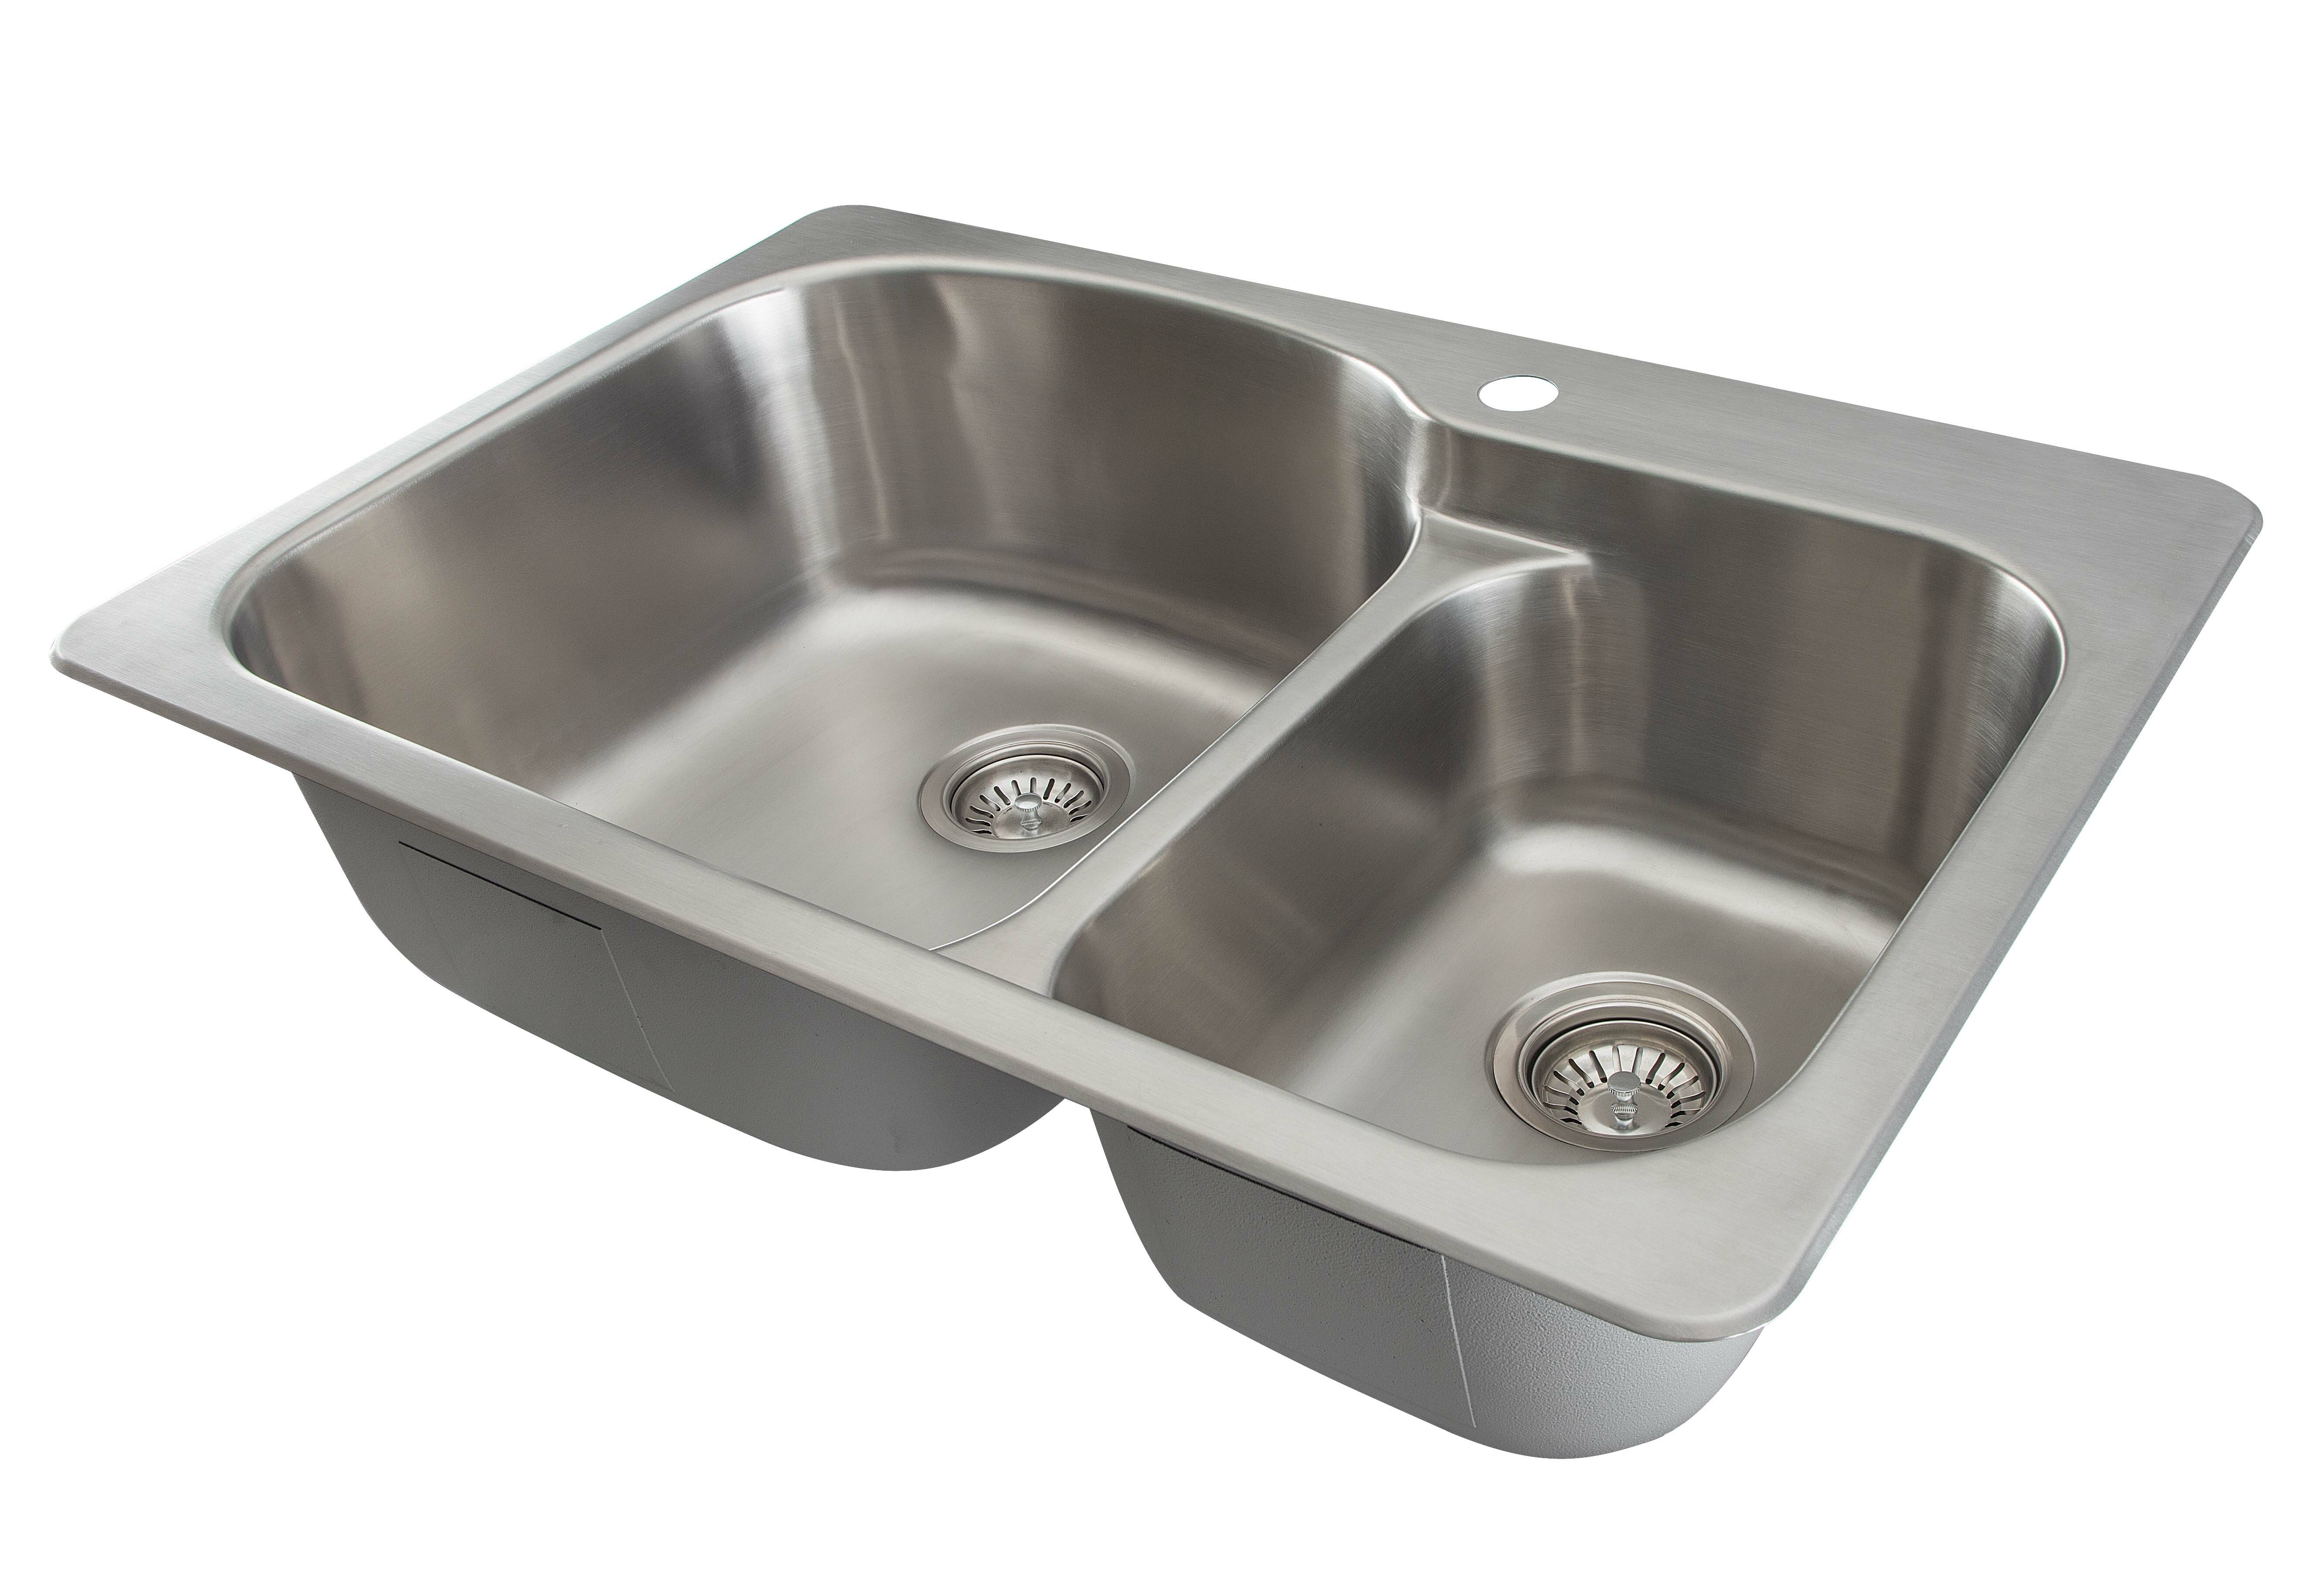 Ancona Tusca Stainless Steel 33 L X 22 W Double Basin Dual Mount Kitchen Sink With Basket Strainer Wayfair